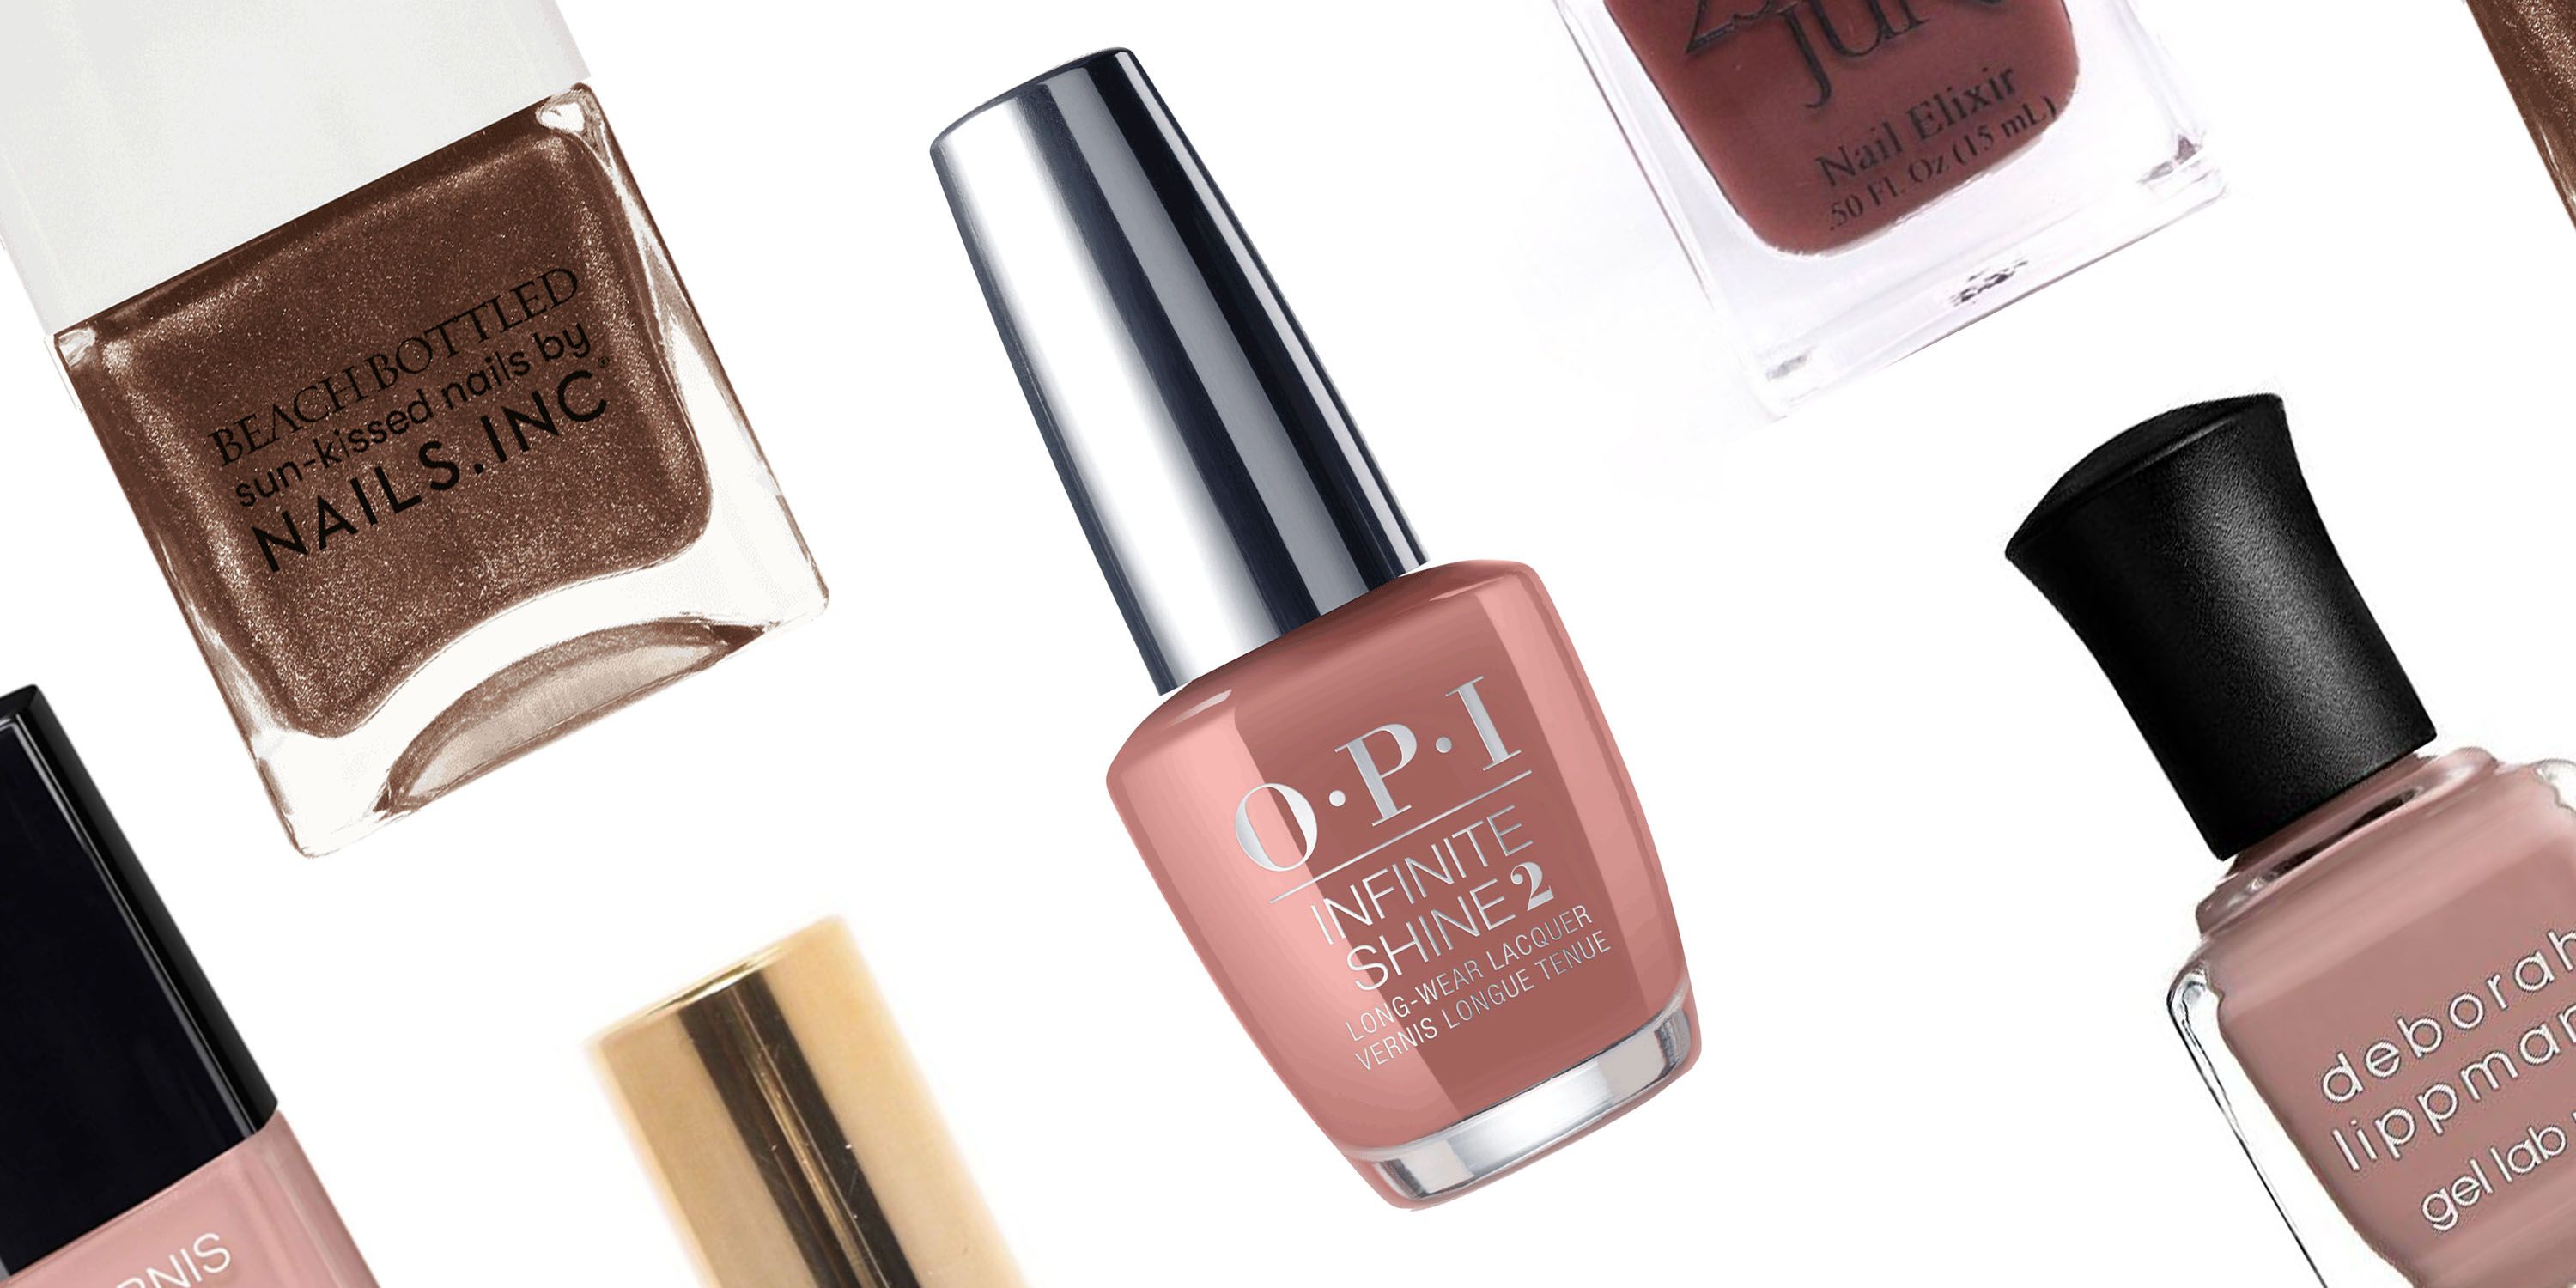 13 Best Nude Nail Polish Colors - Neutral Nail Colors for Every Skin Tone